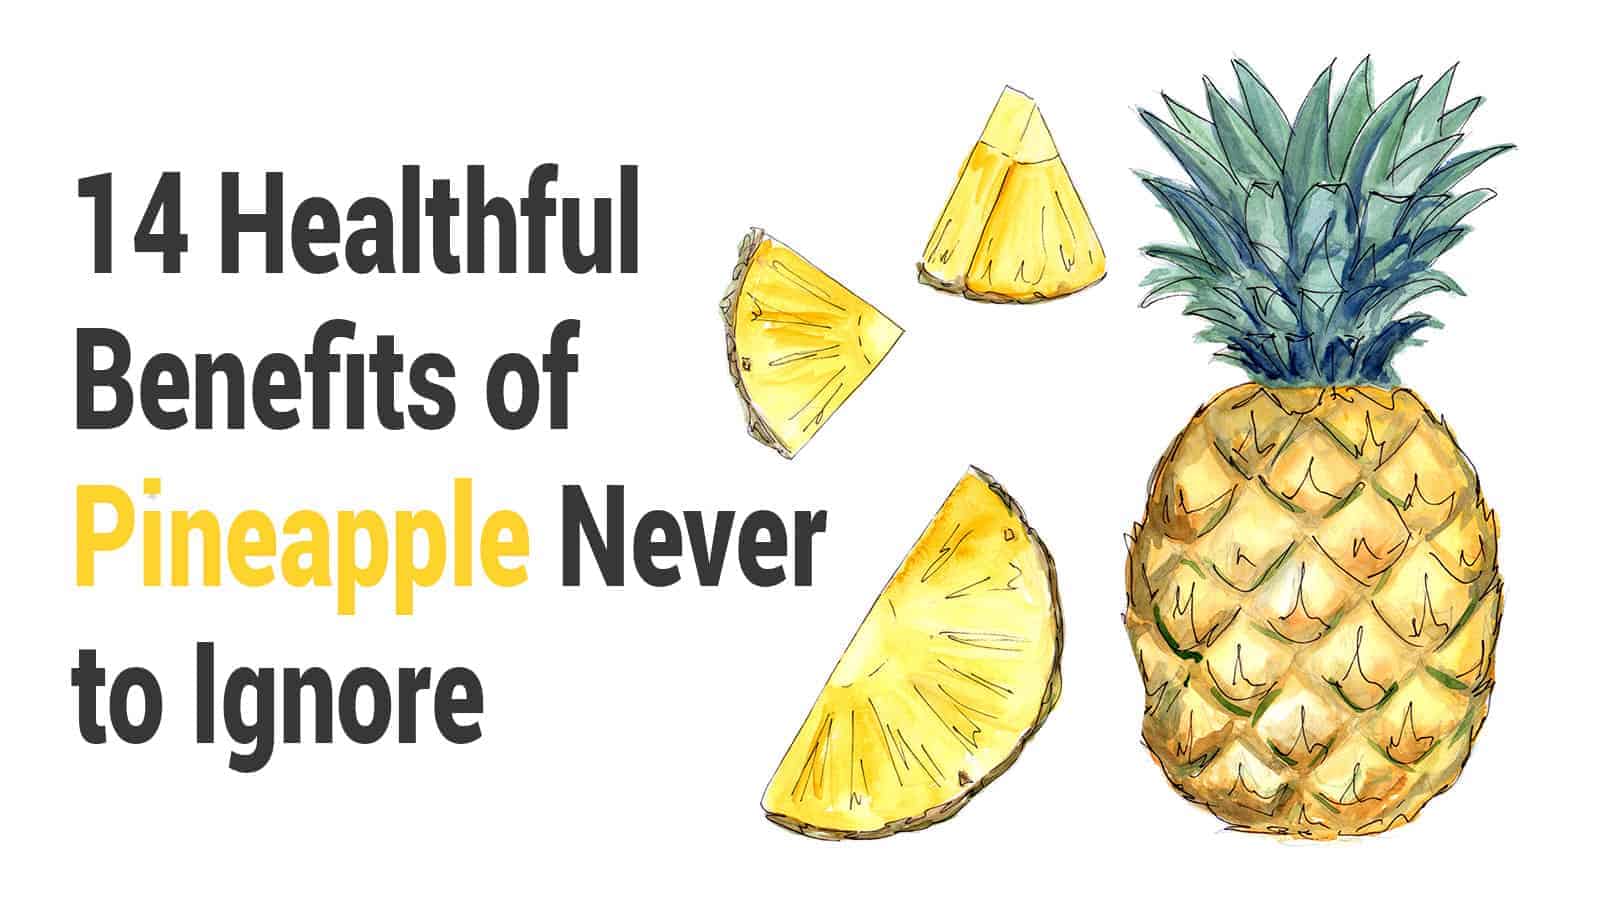 14 Healthful Benefits of Pineapple Never to Ignore